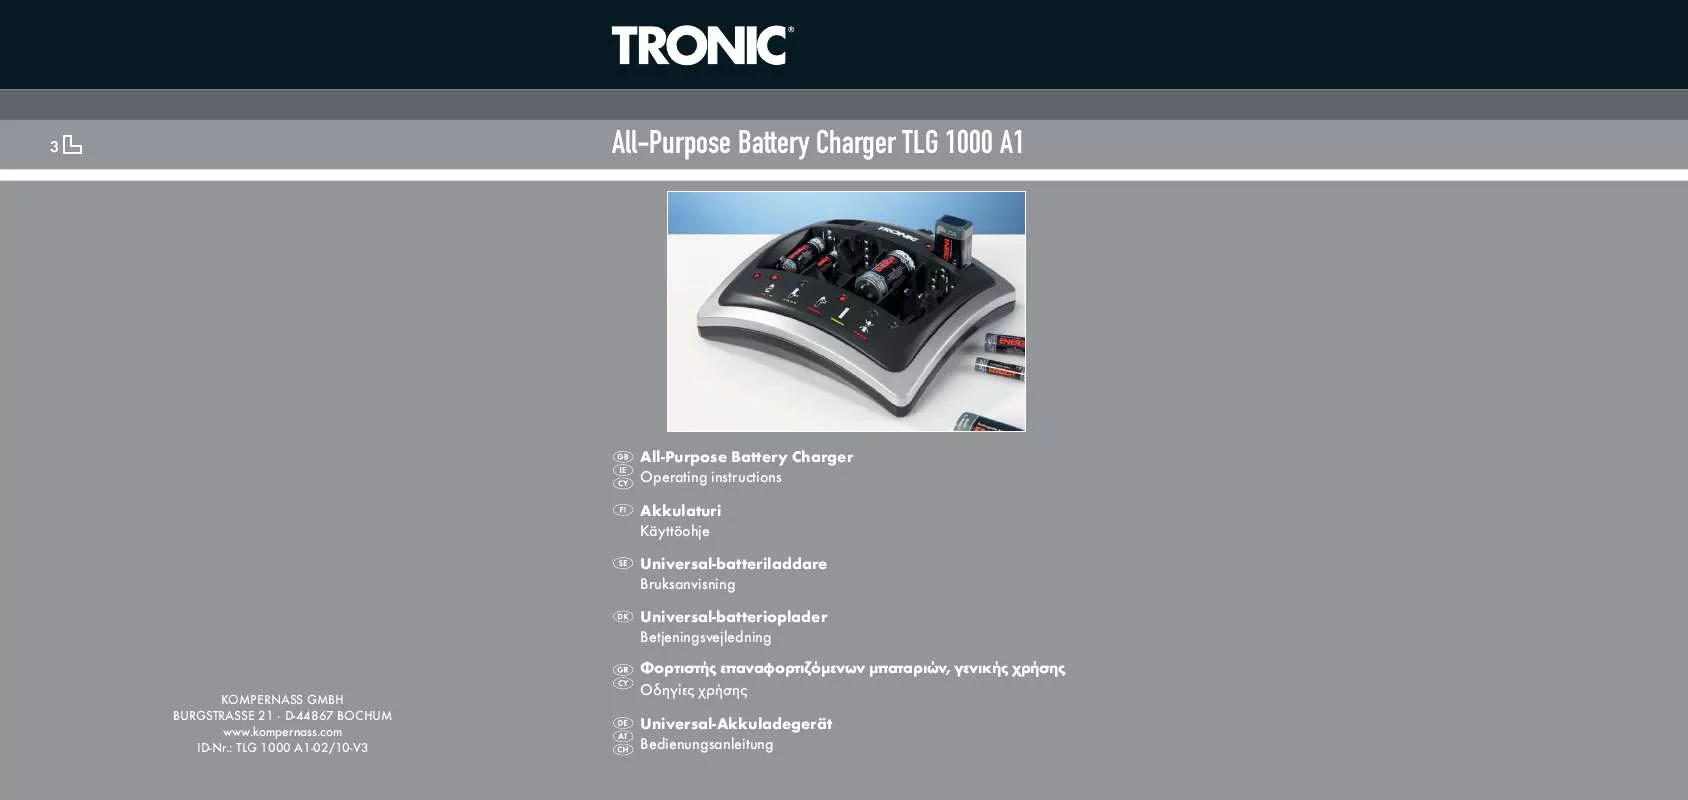 Mode d'emploi TRONIC TLG 1000 A1 ALL-PURPOSE BATTERY CHARGER